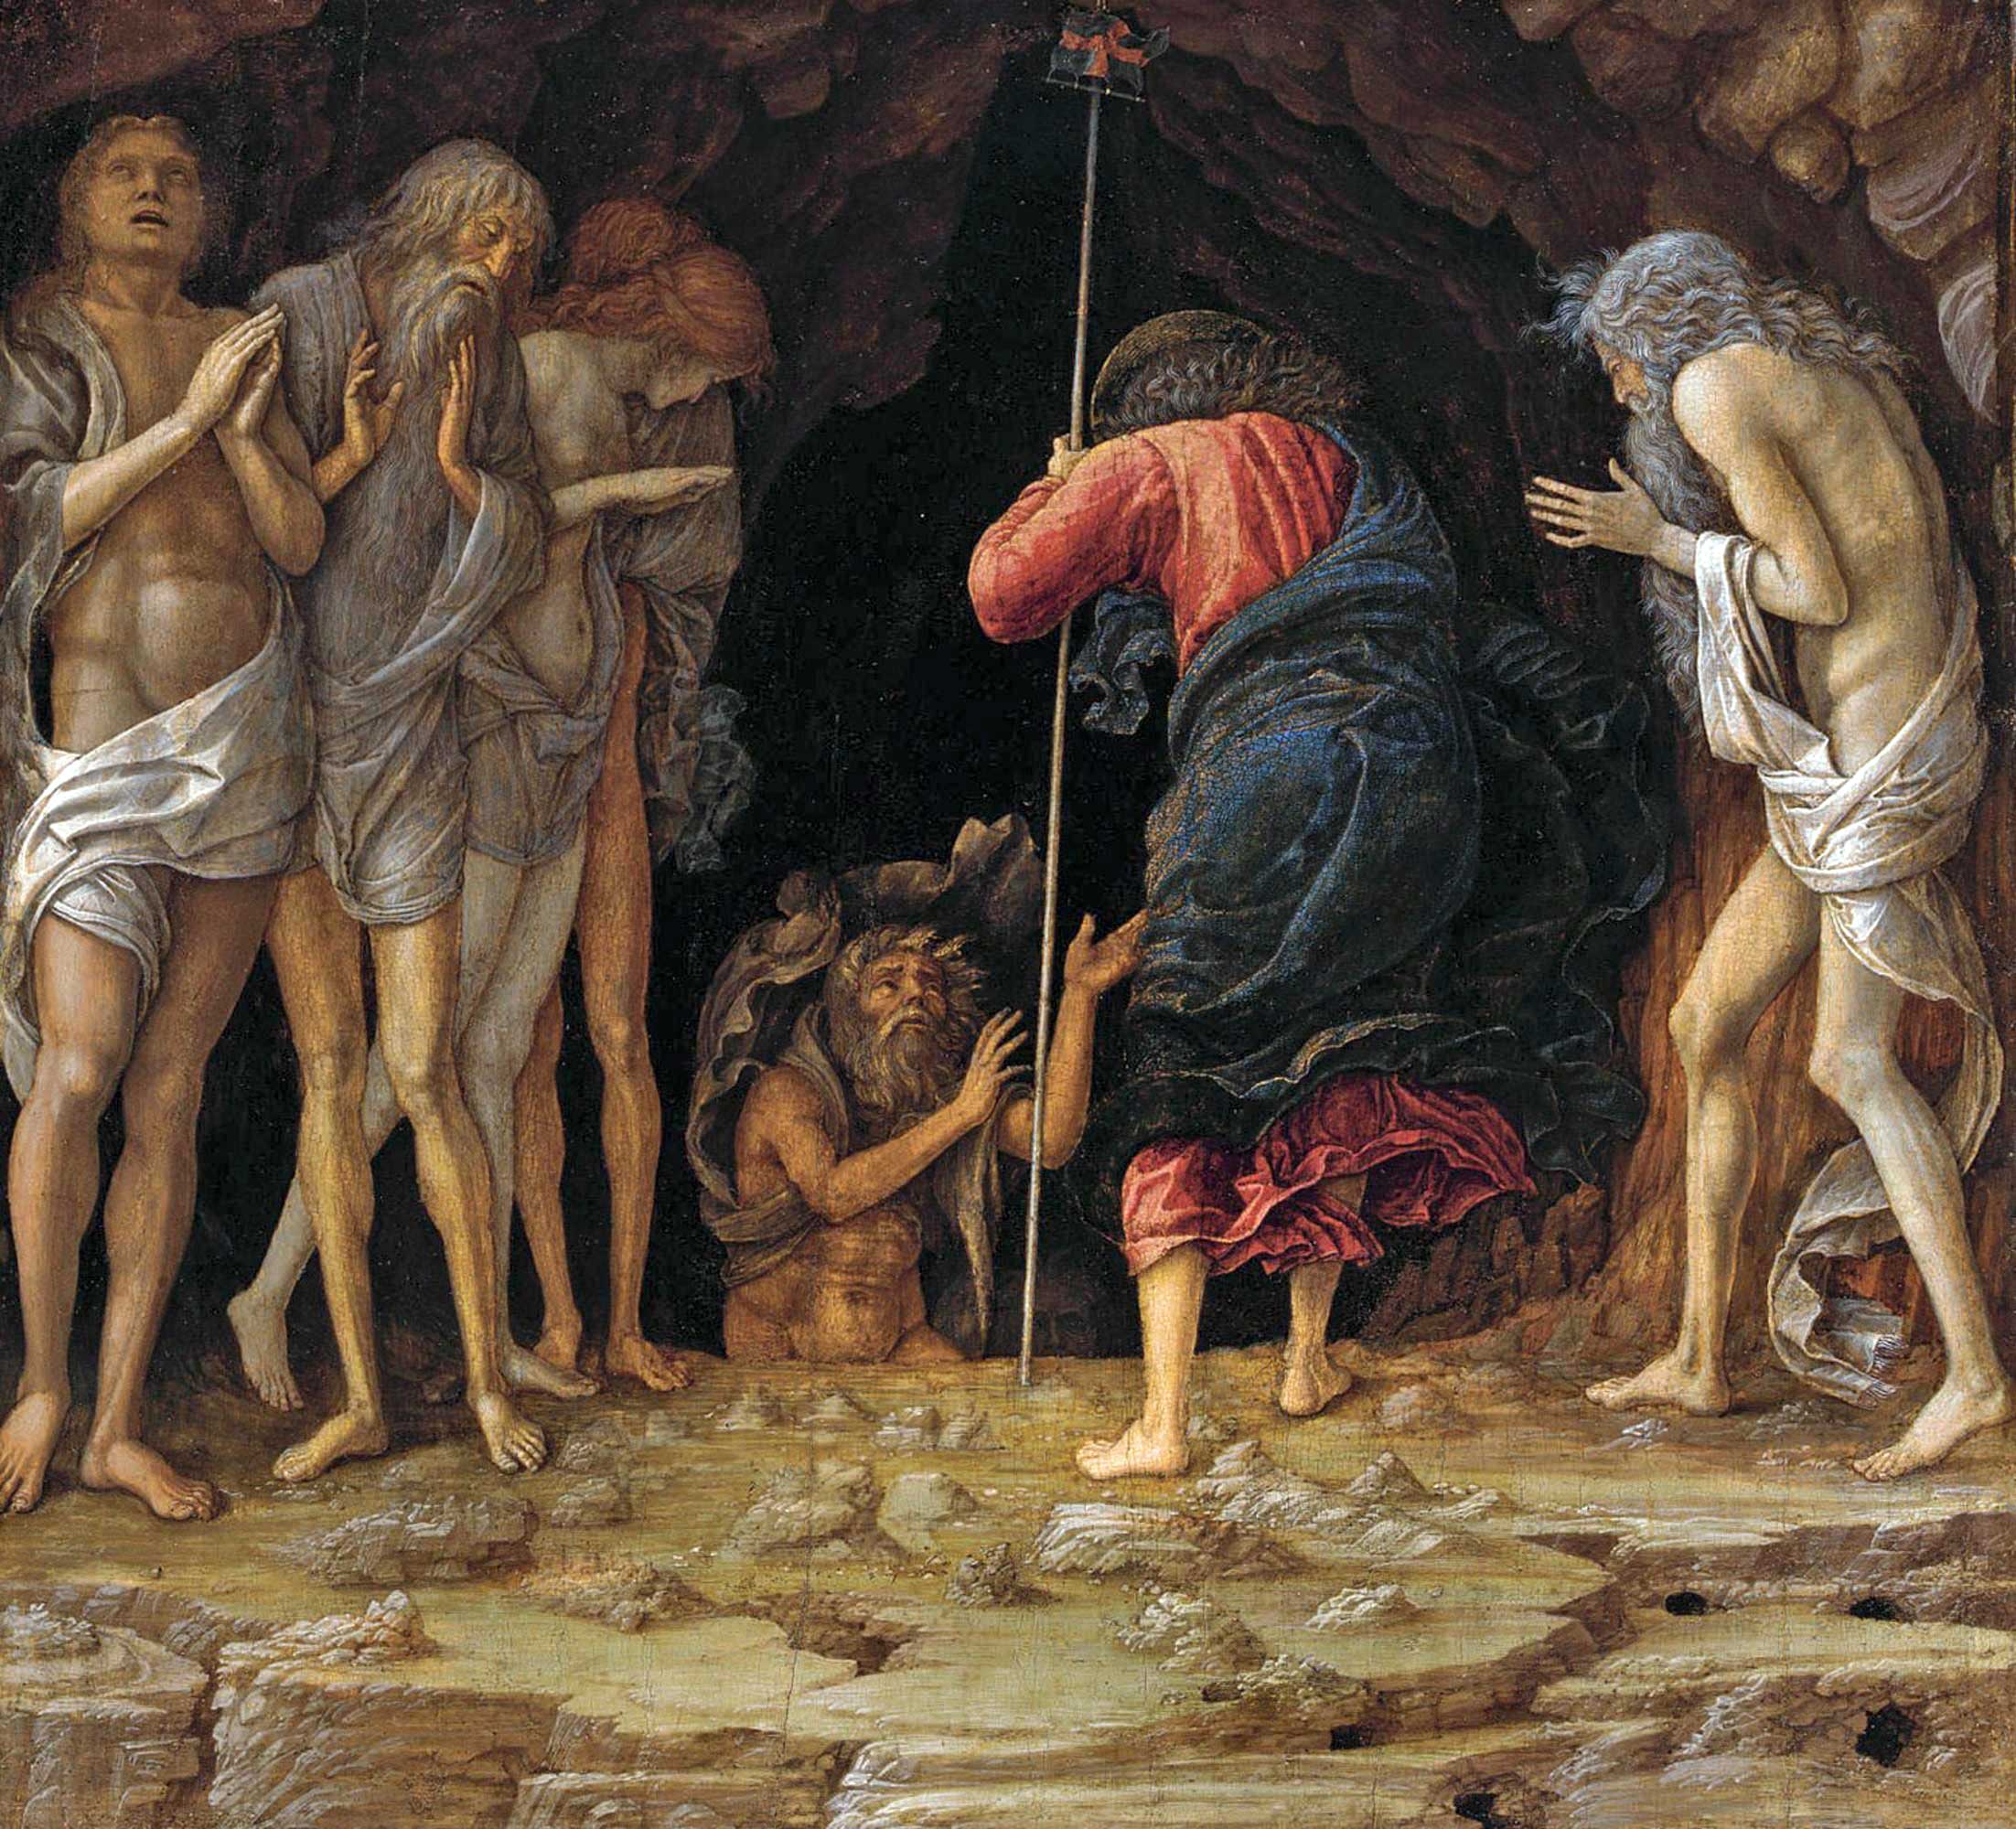 The Harrowing of Hell by Andrea Mantegna, around 1470. An important part of Mediaval Easter traditions, the Harrowing of Hell describes the descent by Christ into Hell between his death and resurrection to release the innocent victims of the devil.